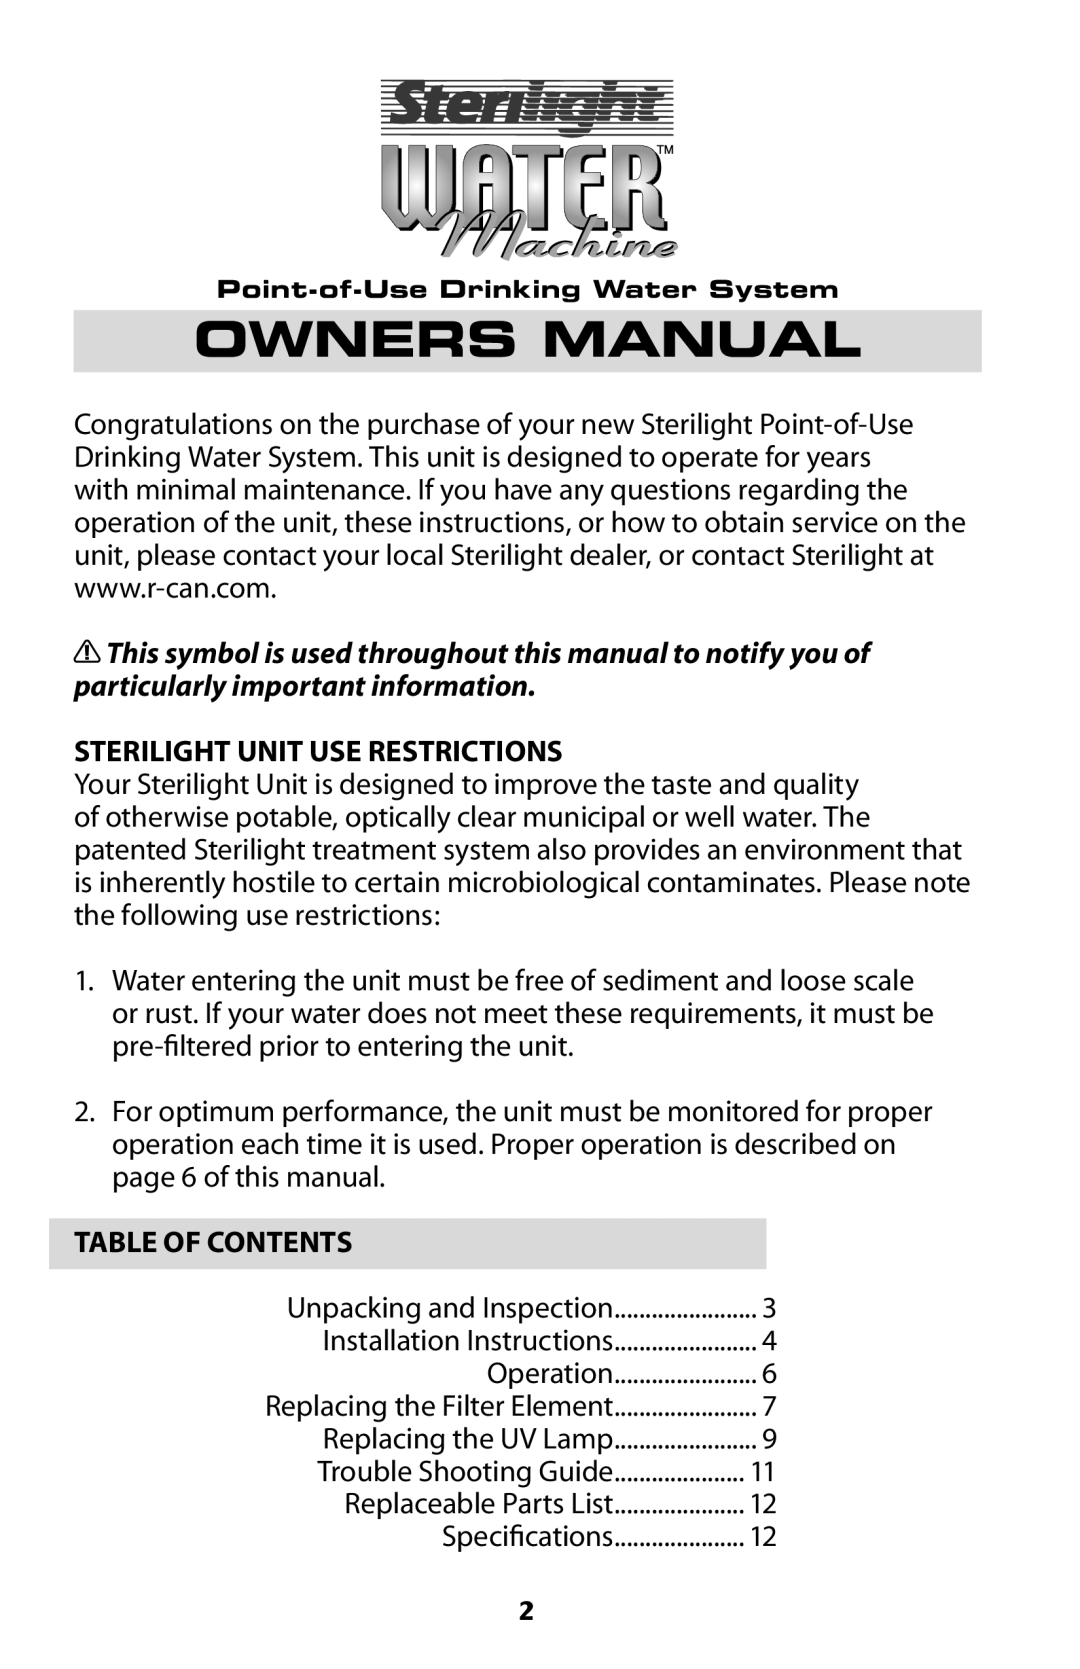 Sterilite Point-of-Use Drinking Water System owner manual Sterilight Unit Use Restrictions 